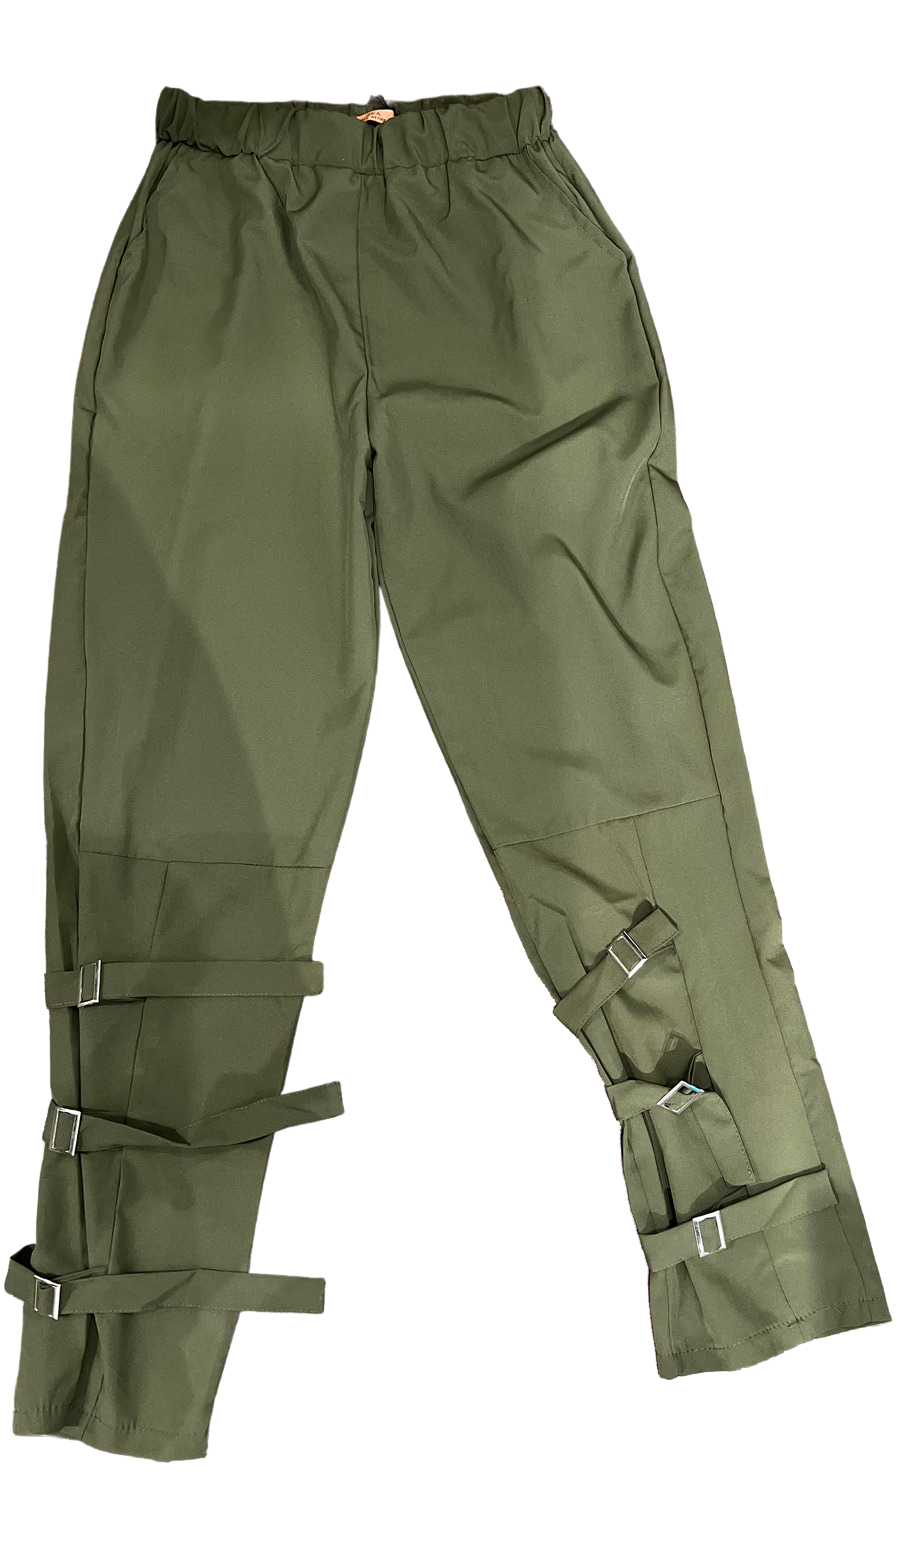 Green Joggers w/ Buckles